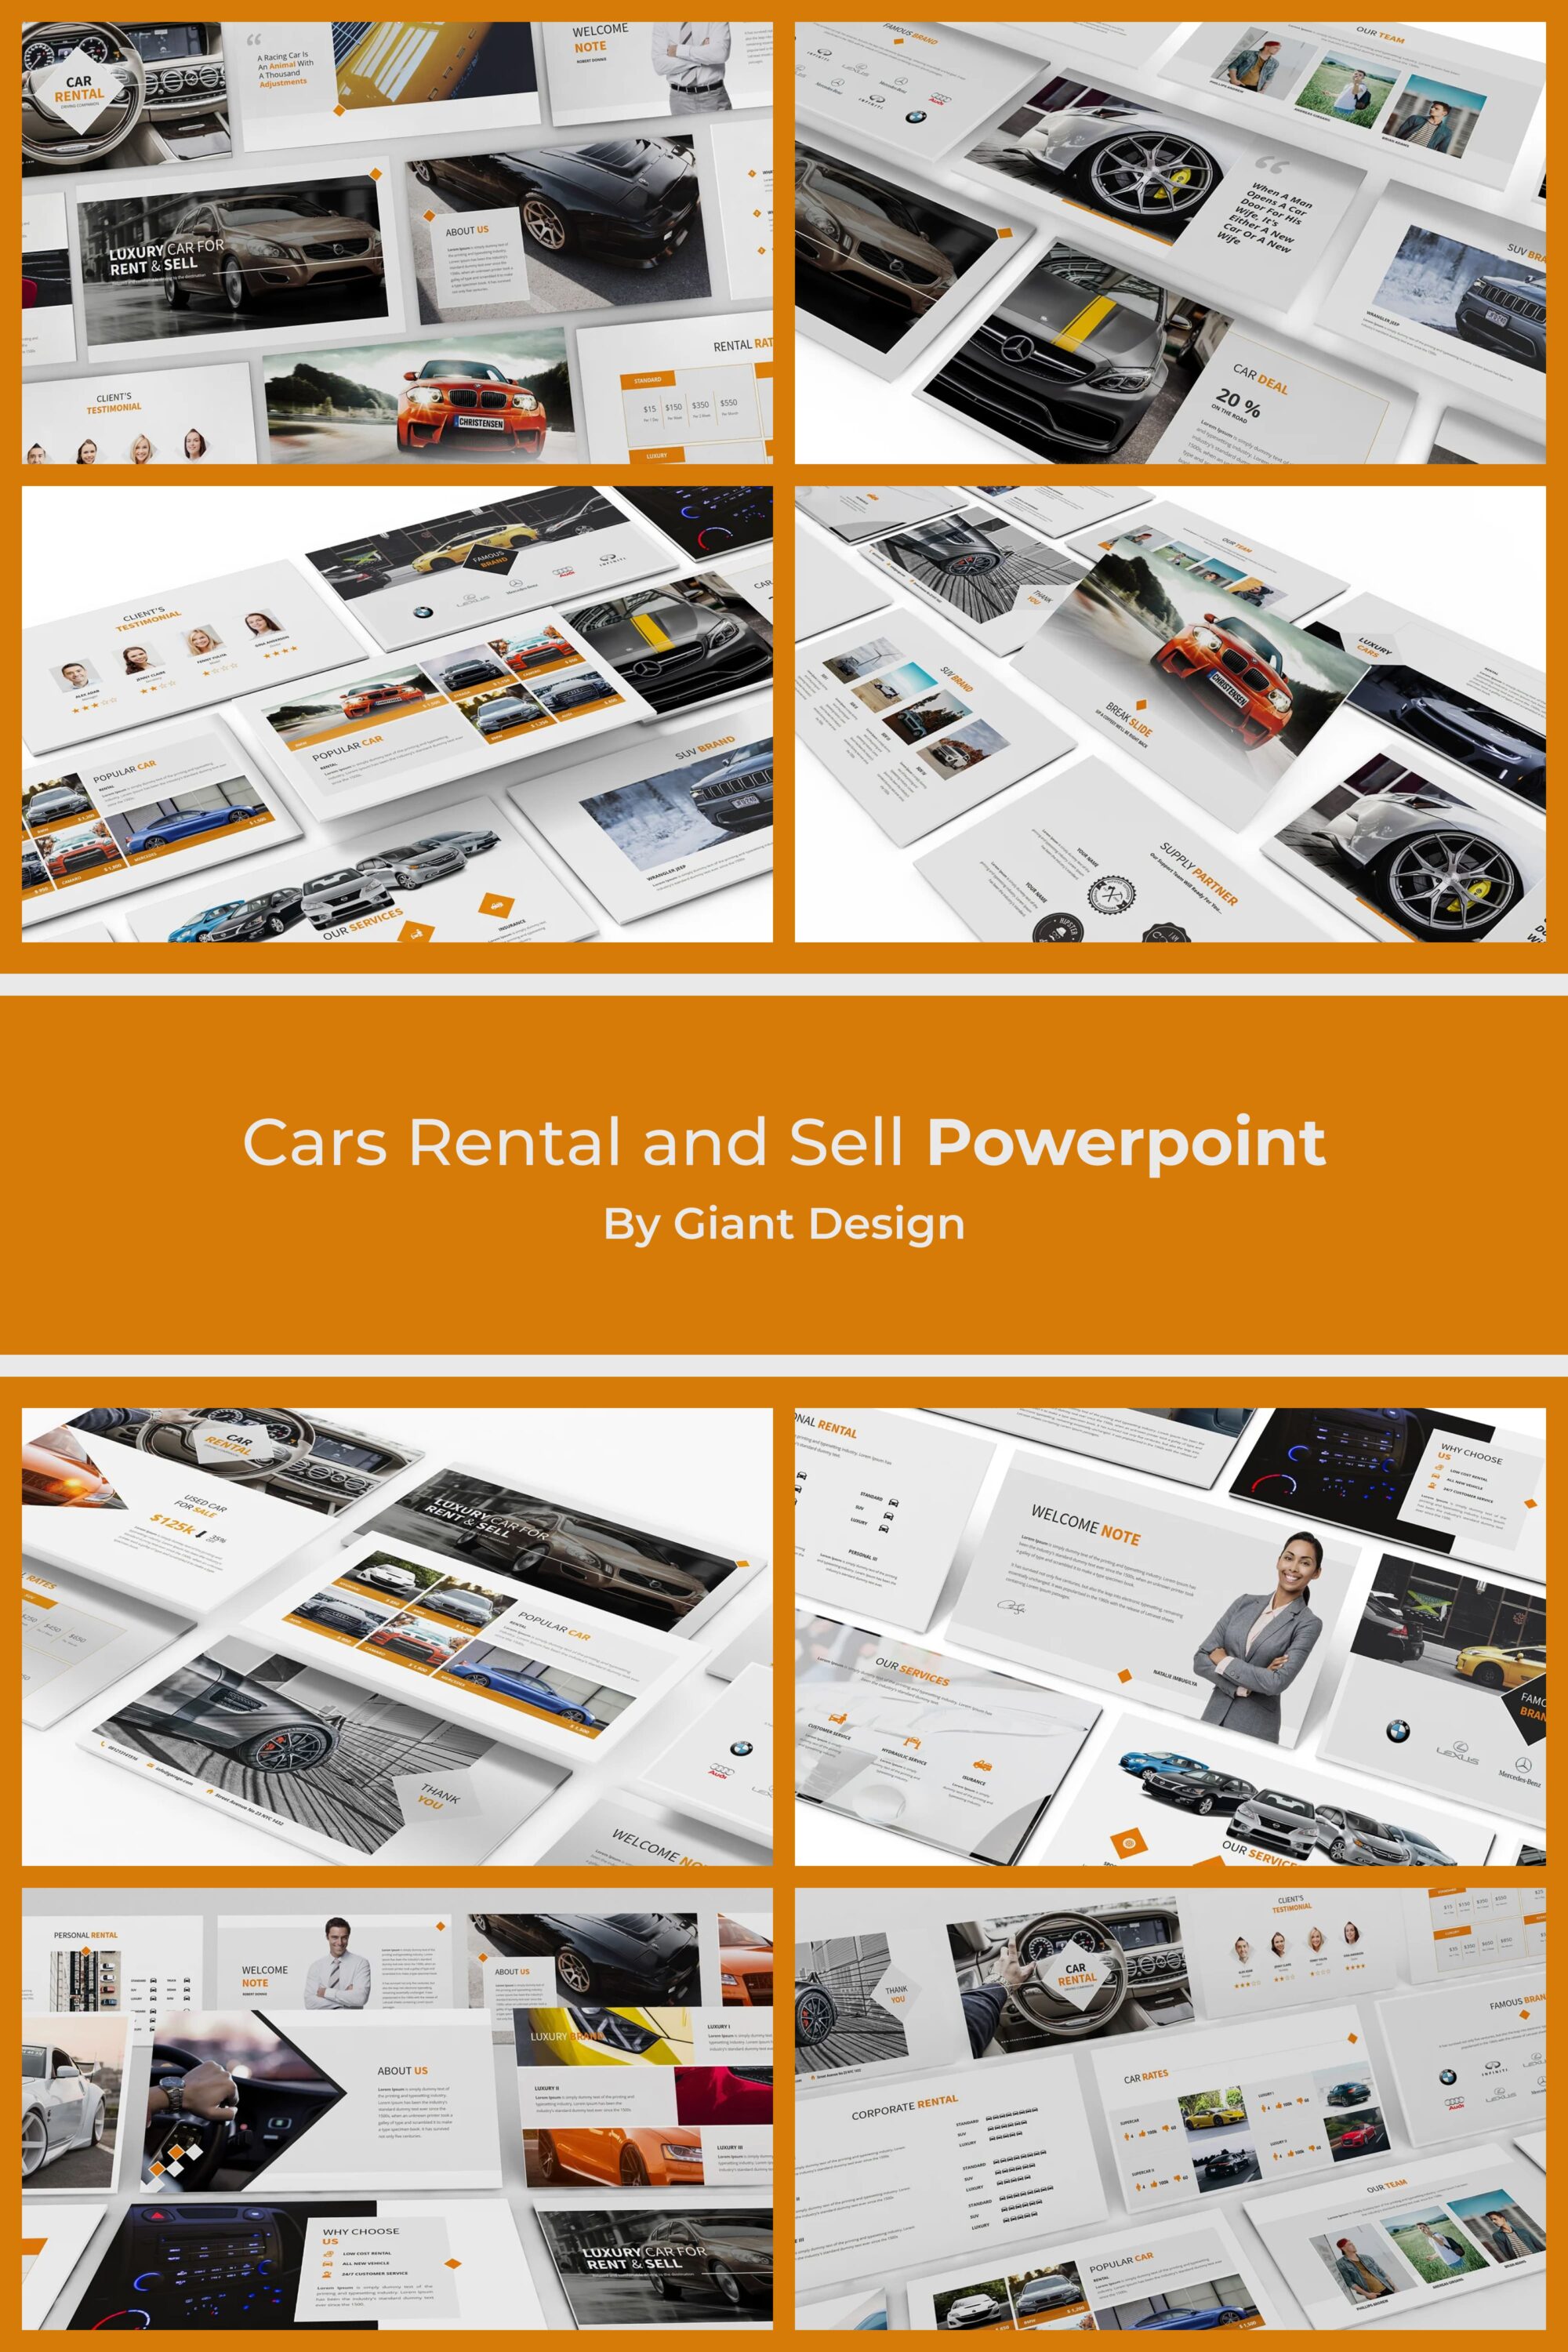 cars rental and sell powerpoint 03